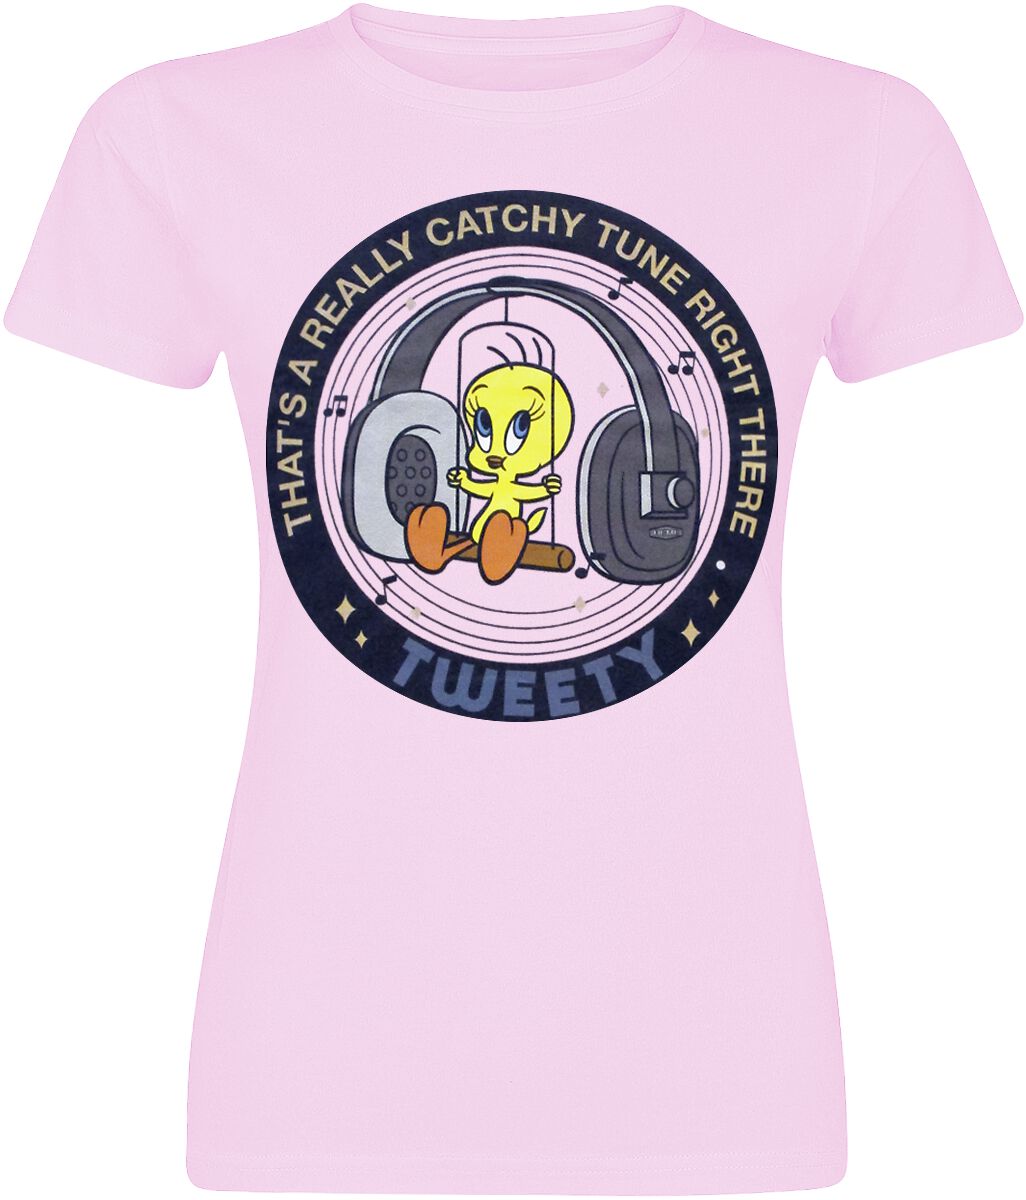 Looney Tunes Catchy Tune T-Shirt light pink